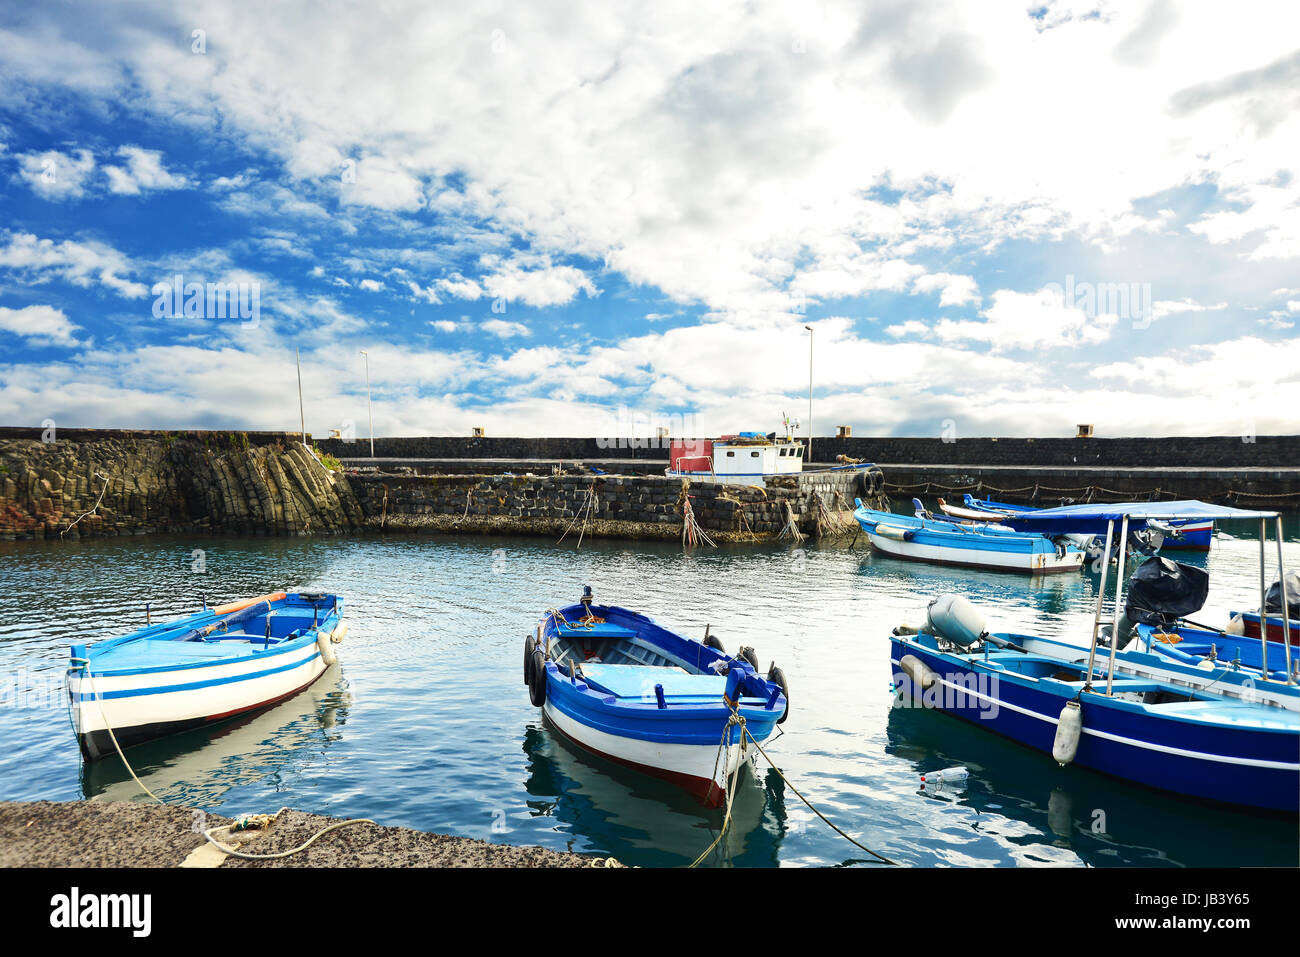 Fishing Boat, color blue white, moored along the quay on a cloudy day Stock Photo